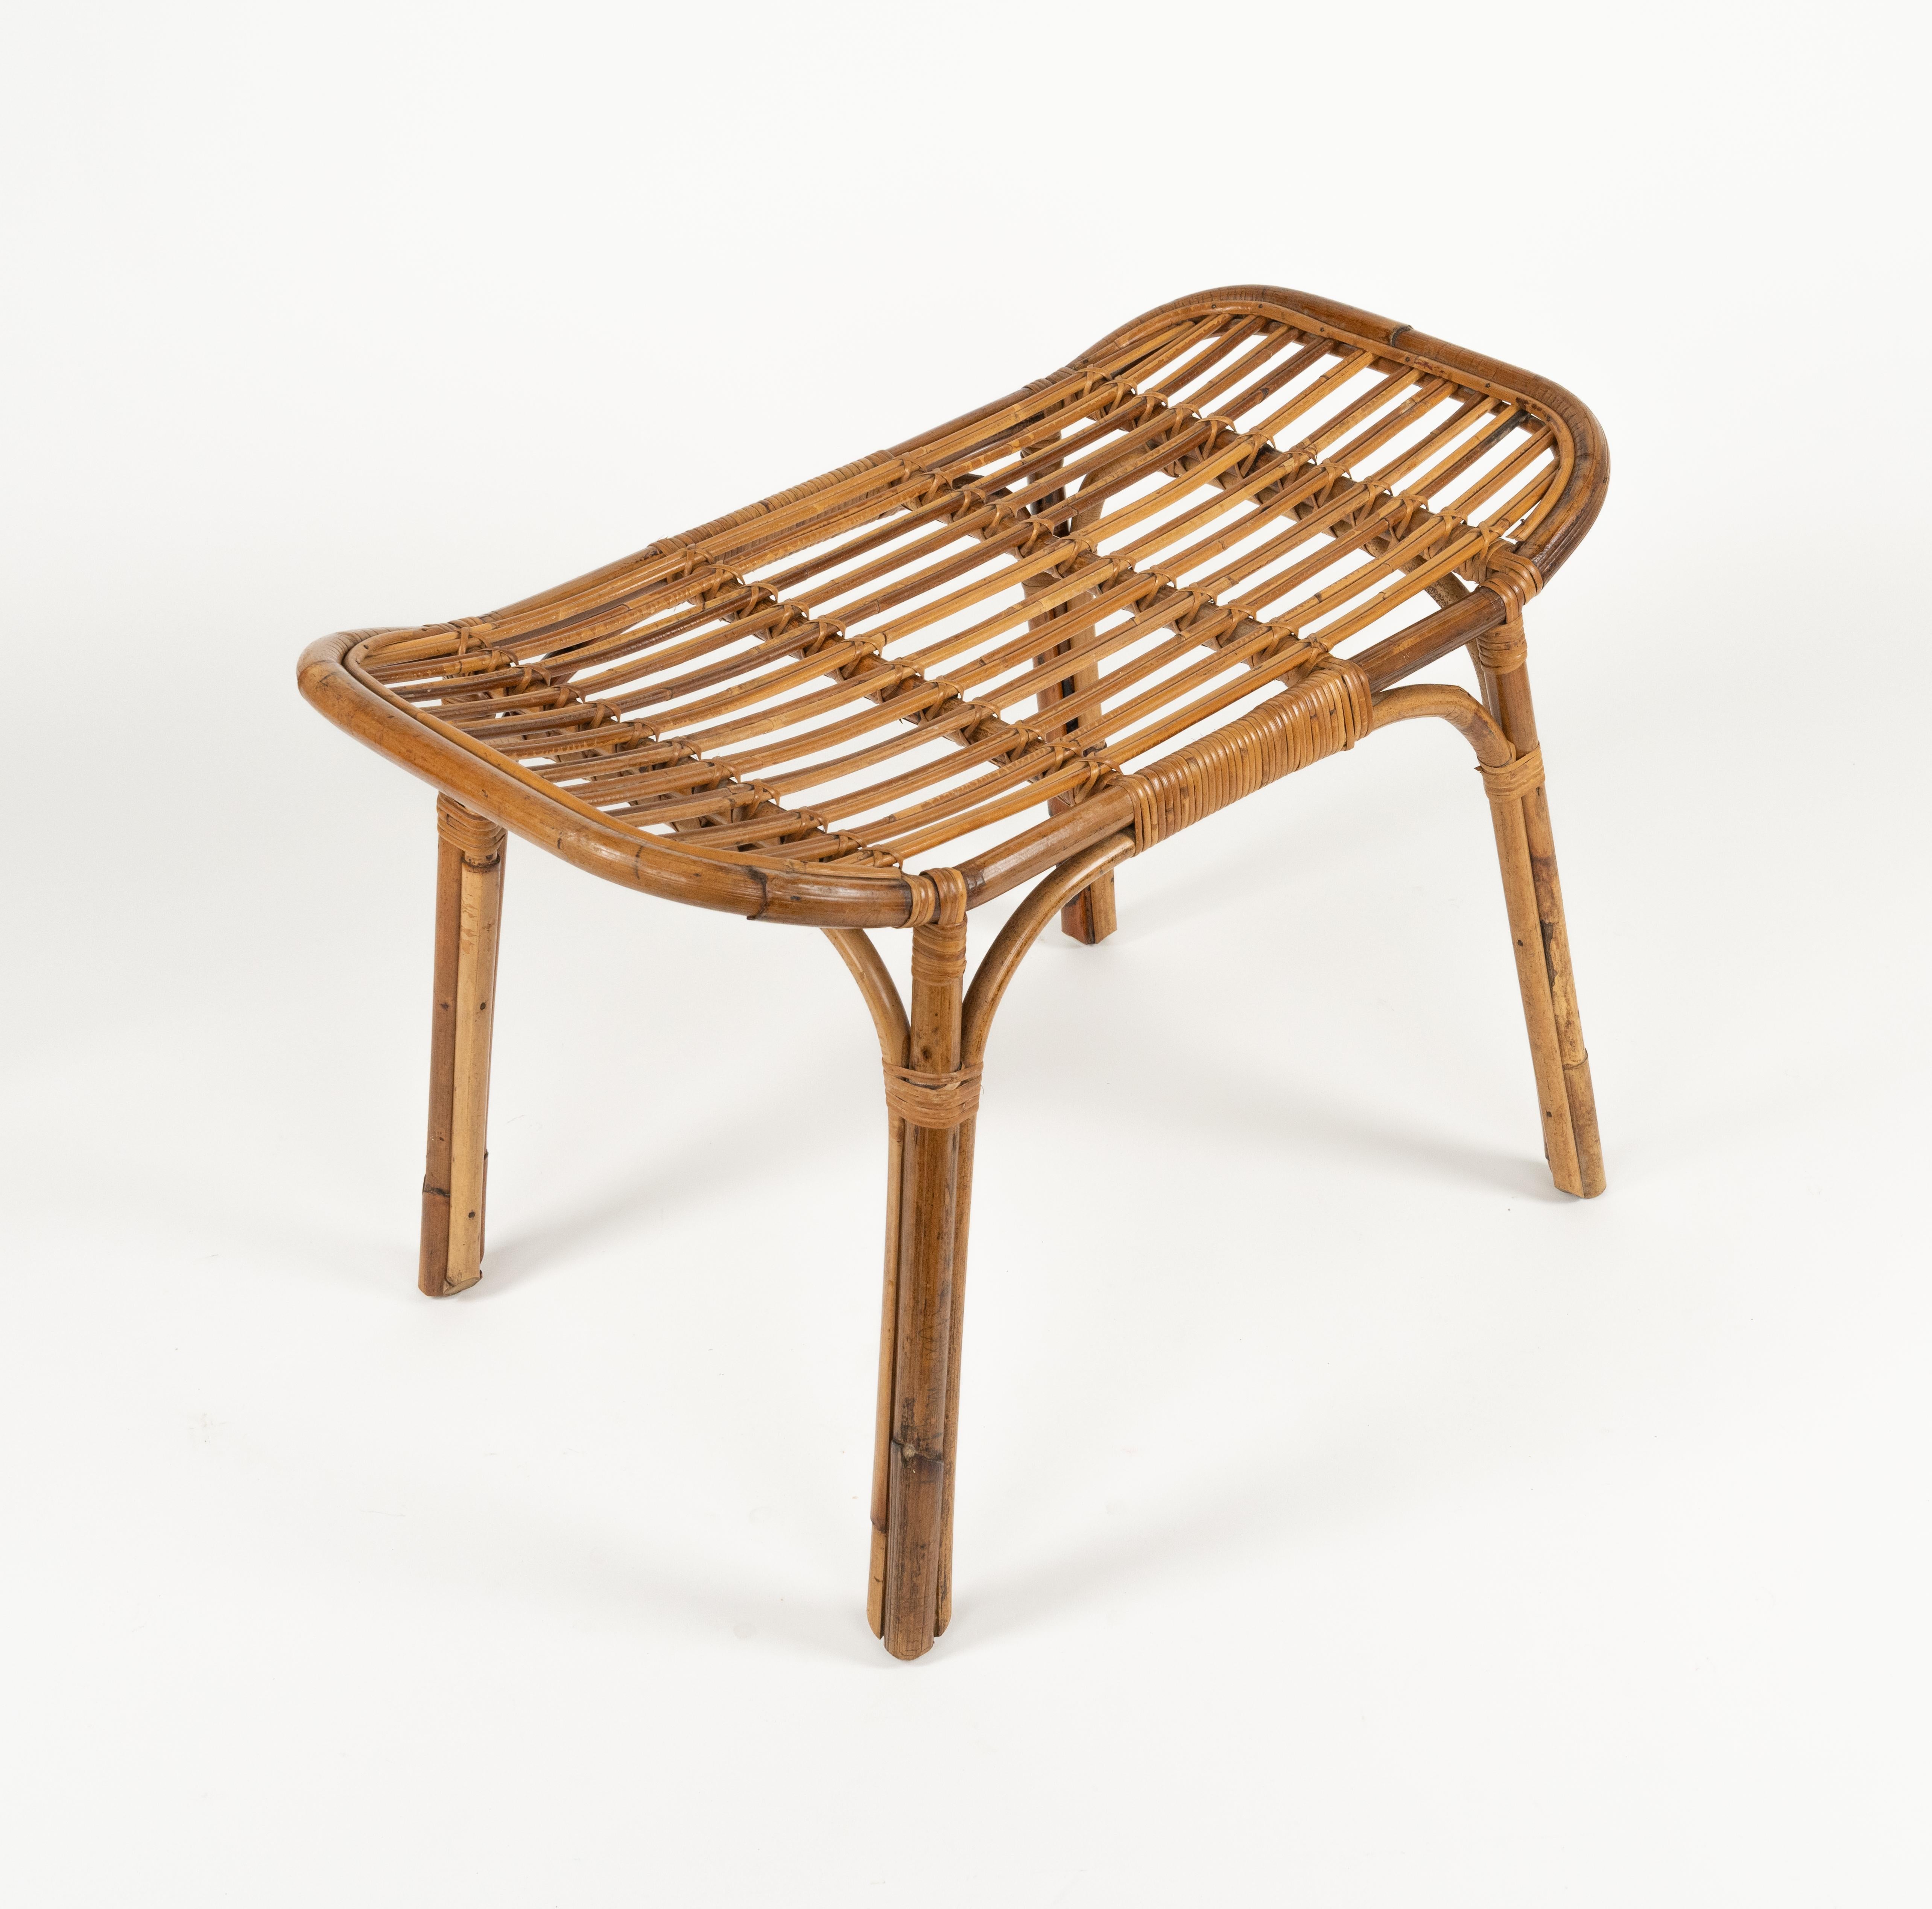 Midcentury Bench or Side Table in Rattan & Bamboo Tito Agnoli Style, Italy 1960s For Sale 2